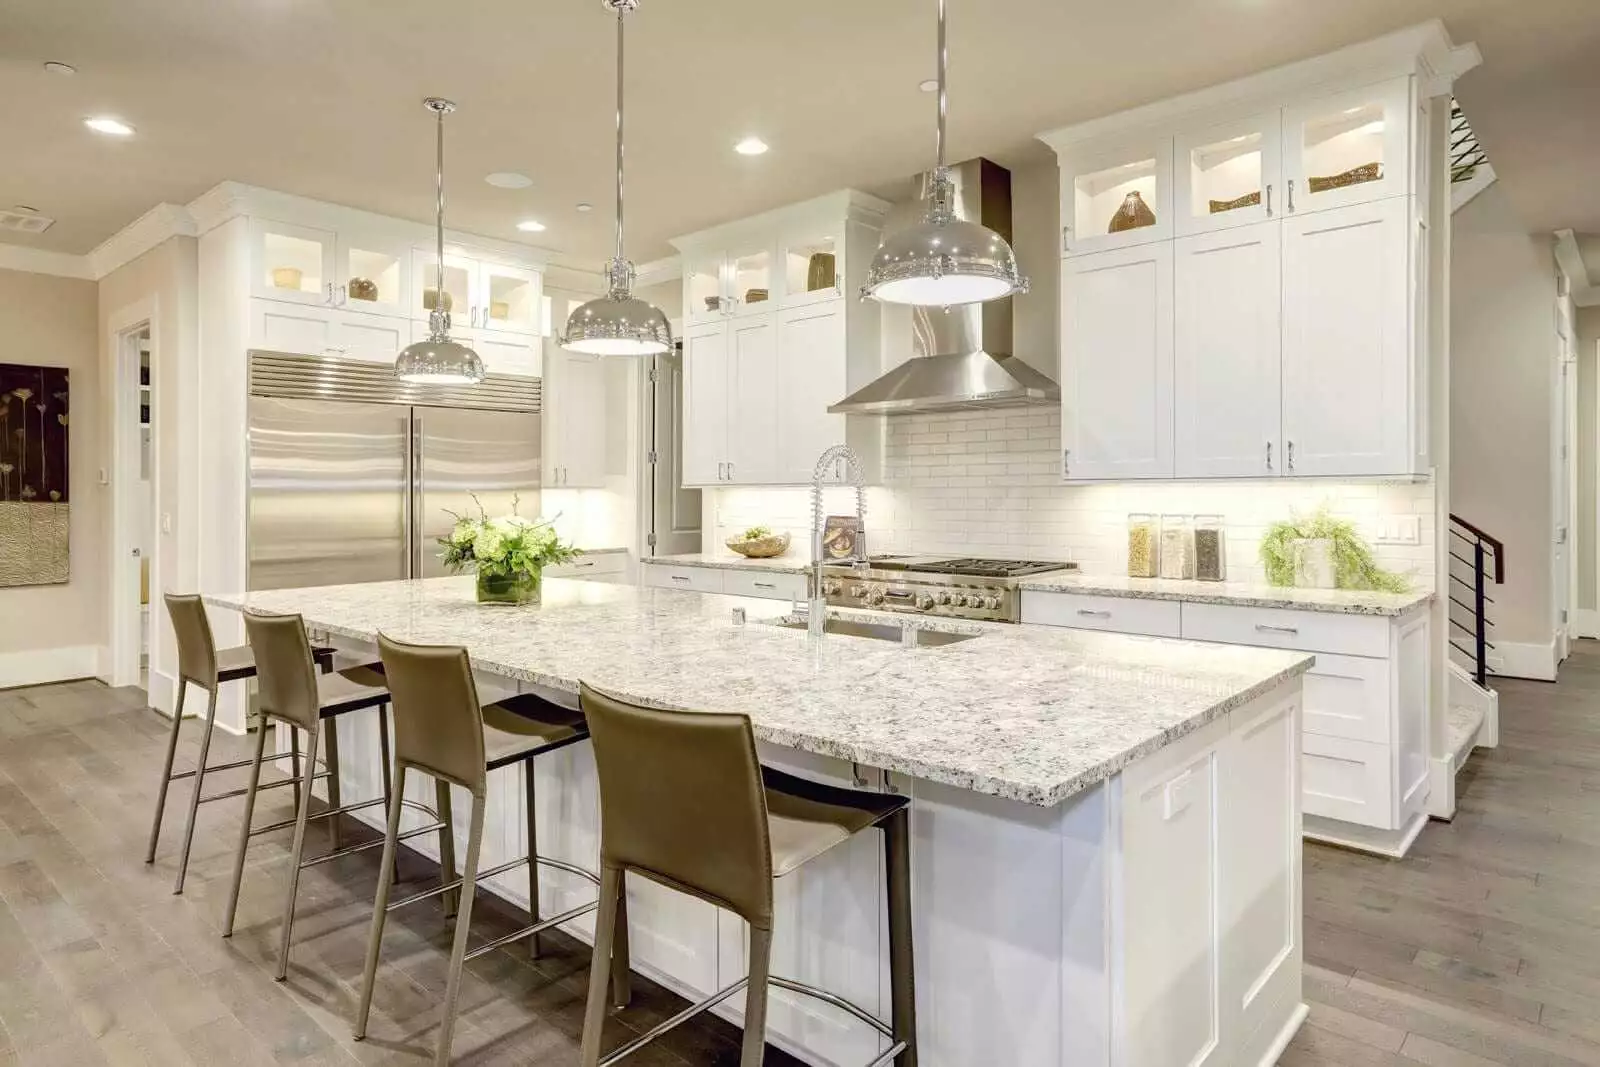 Countertops Remodeling Services In Massachusetts